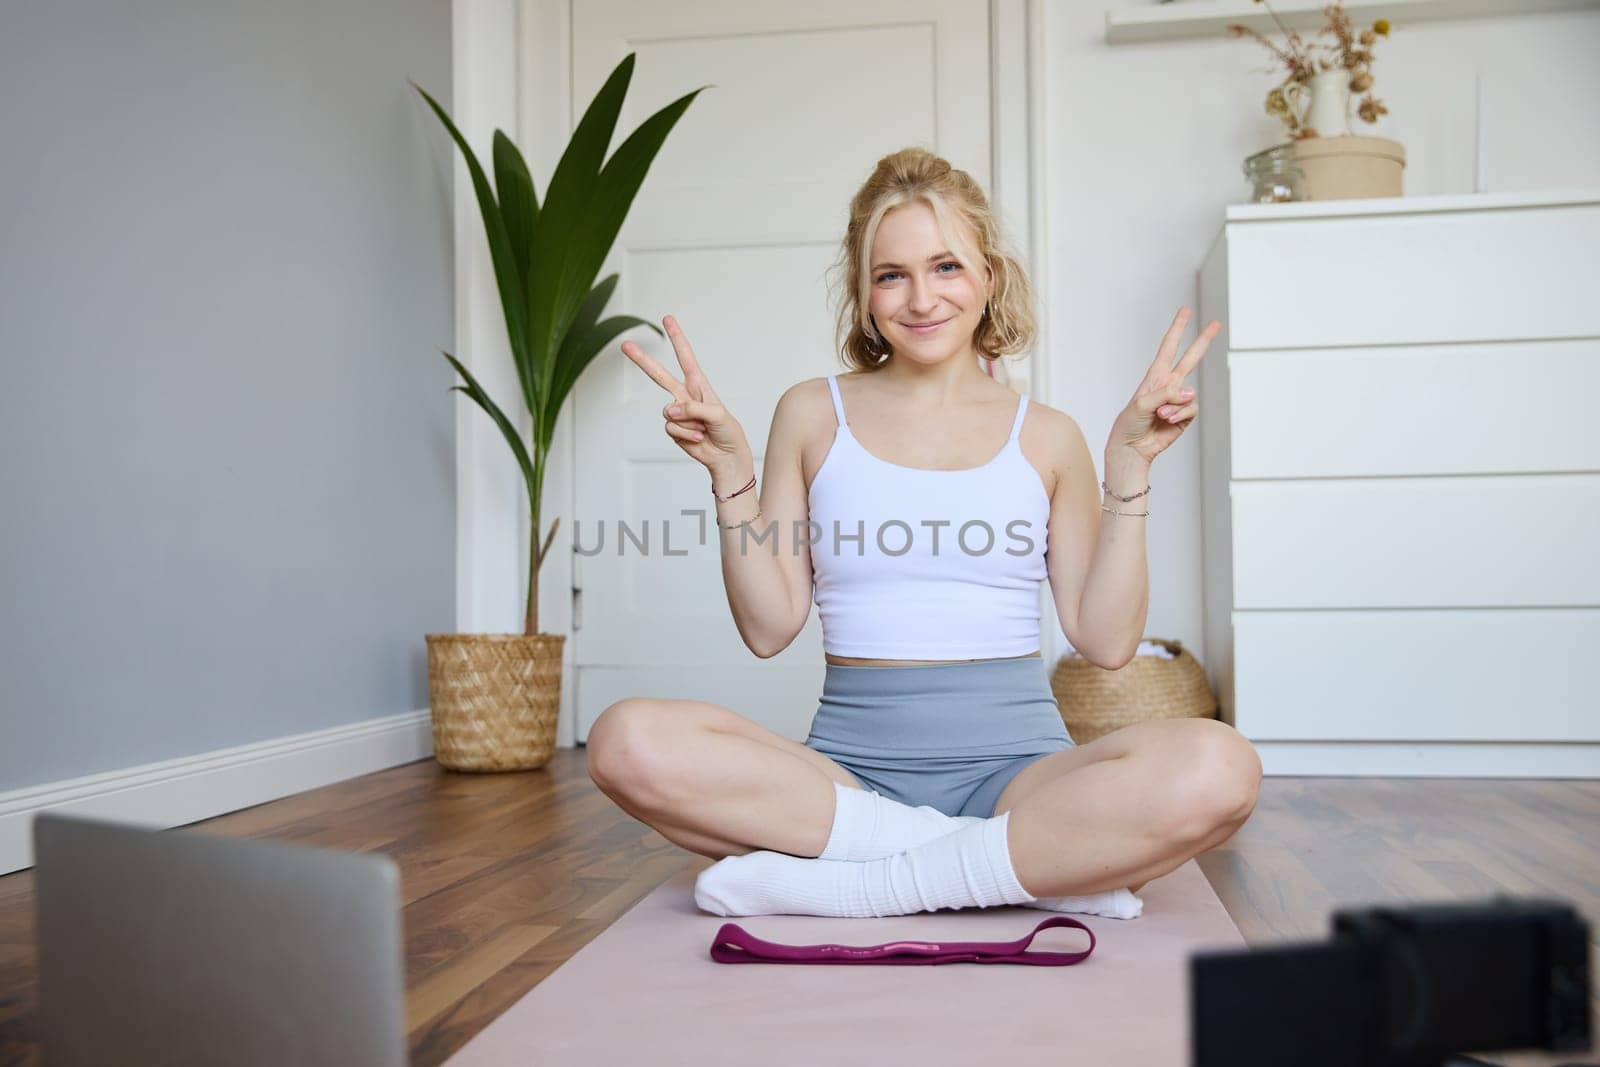 Portrait of cute blond woman shows peace sign, smiles, records yoga vlog on digital camera, workout at home on rubber mat in room.